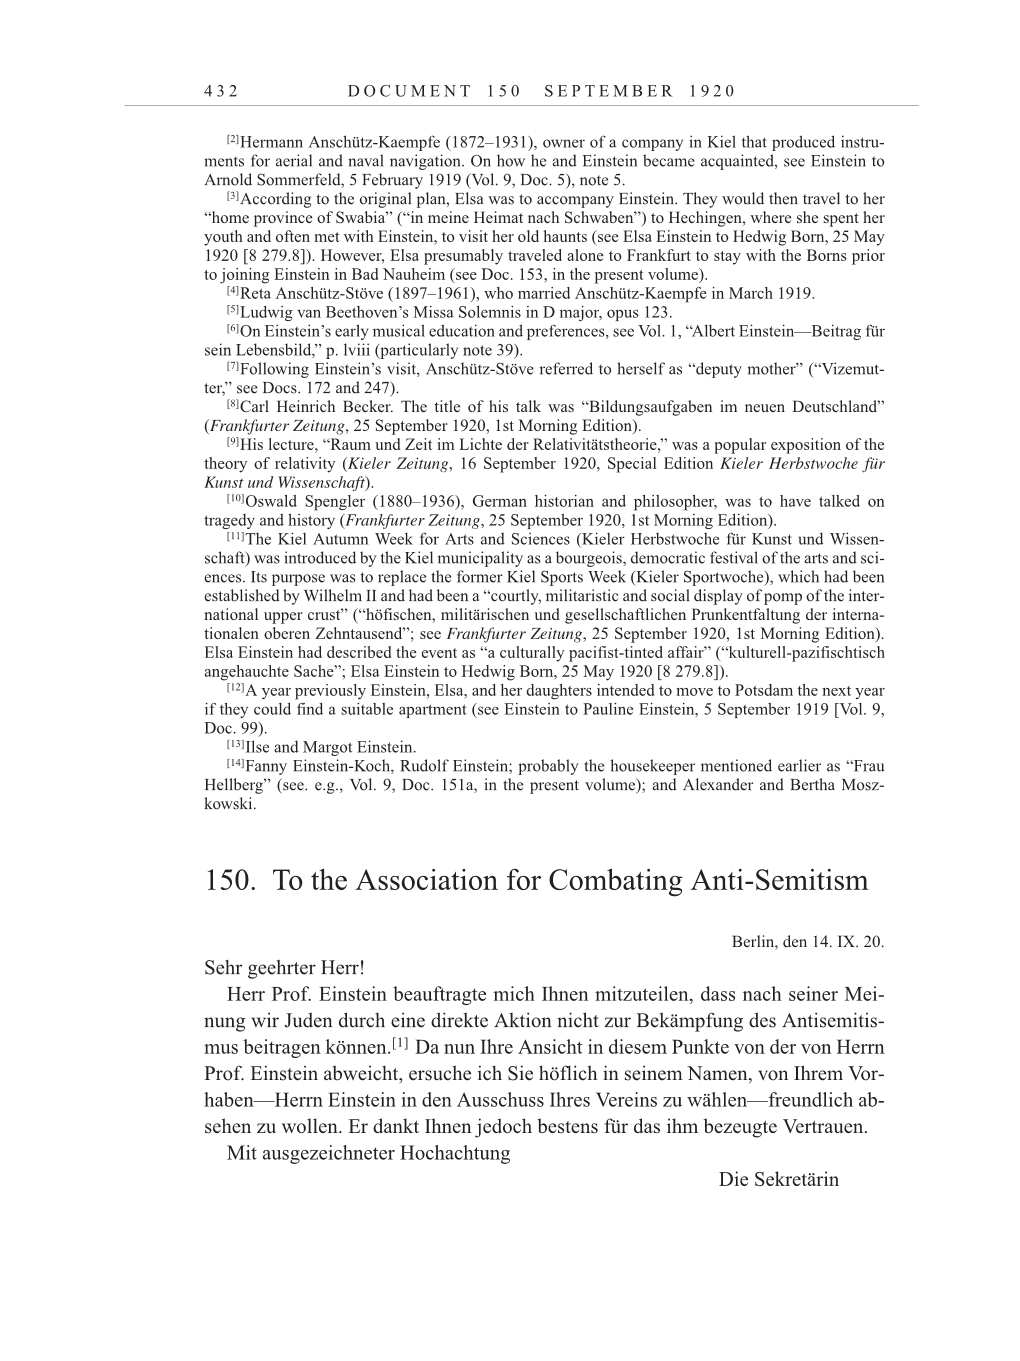 Volume 10: The Berlin Years: Correspondence May-December 1920 / Supplementary Correspondence 1909-1920 page 432